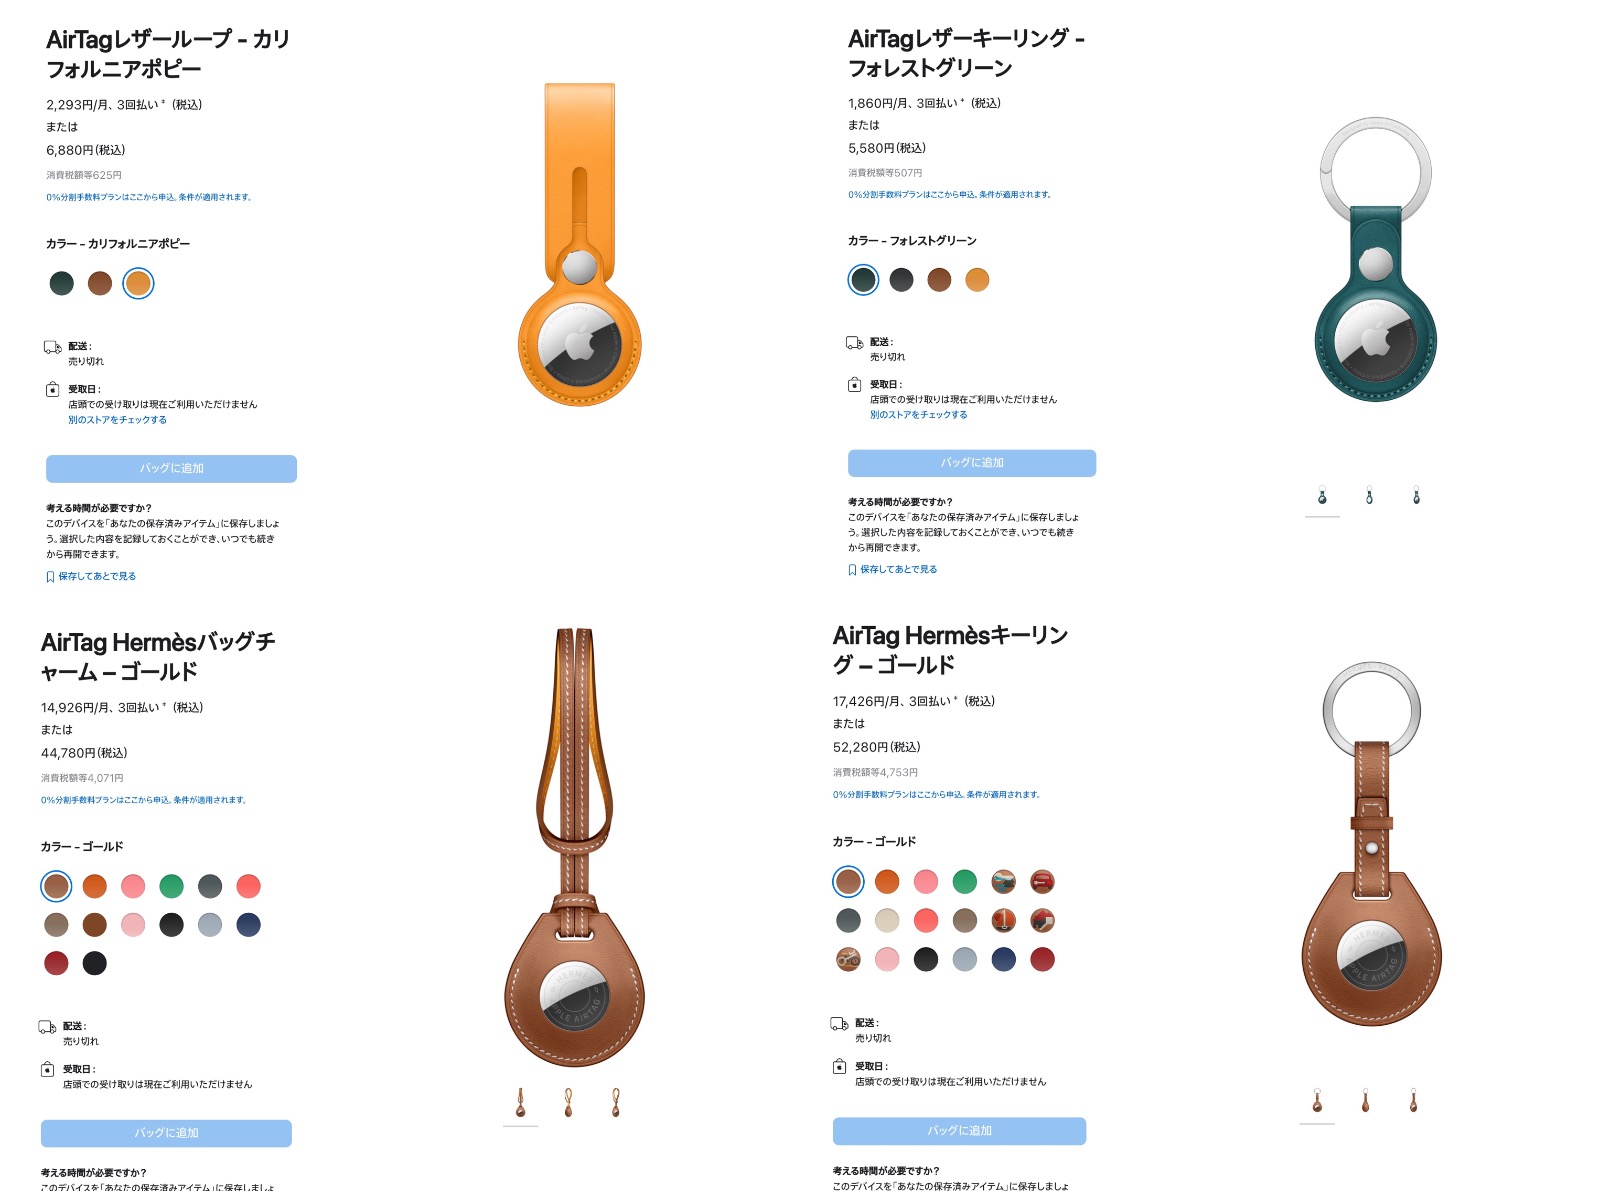 Leather AirTag items are out of stock